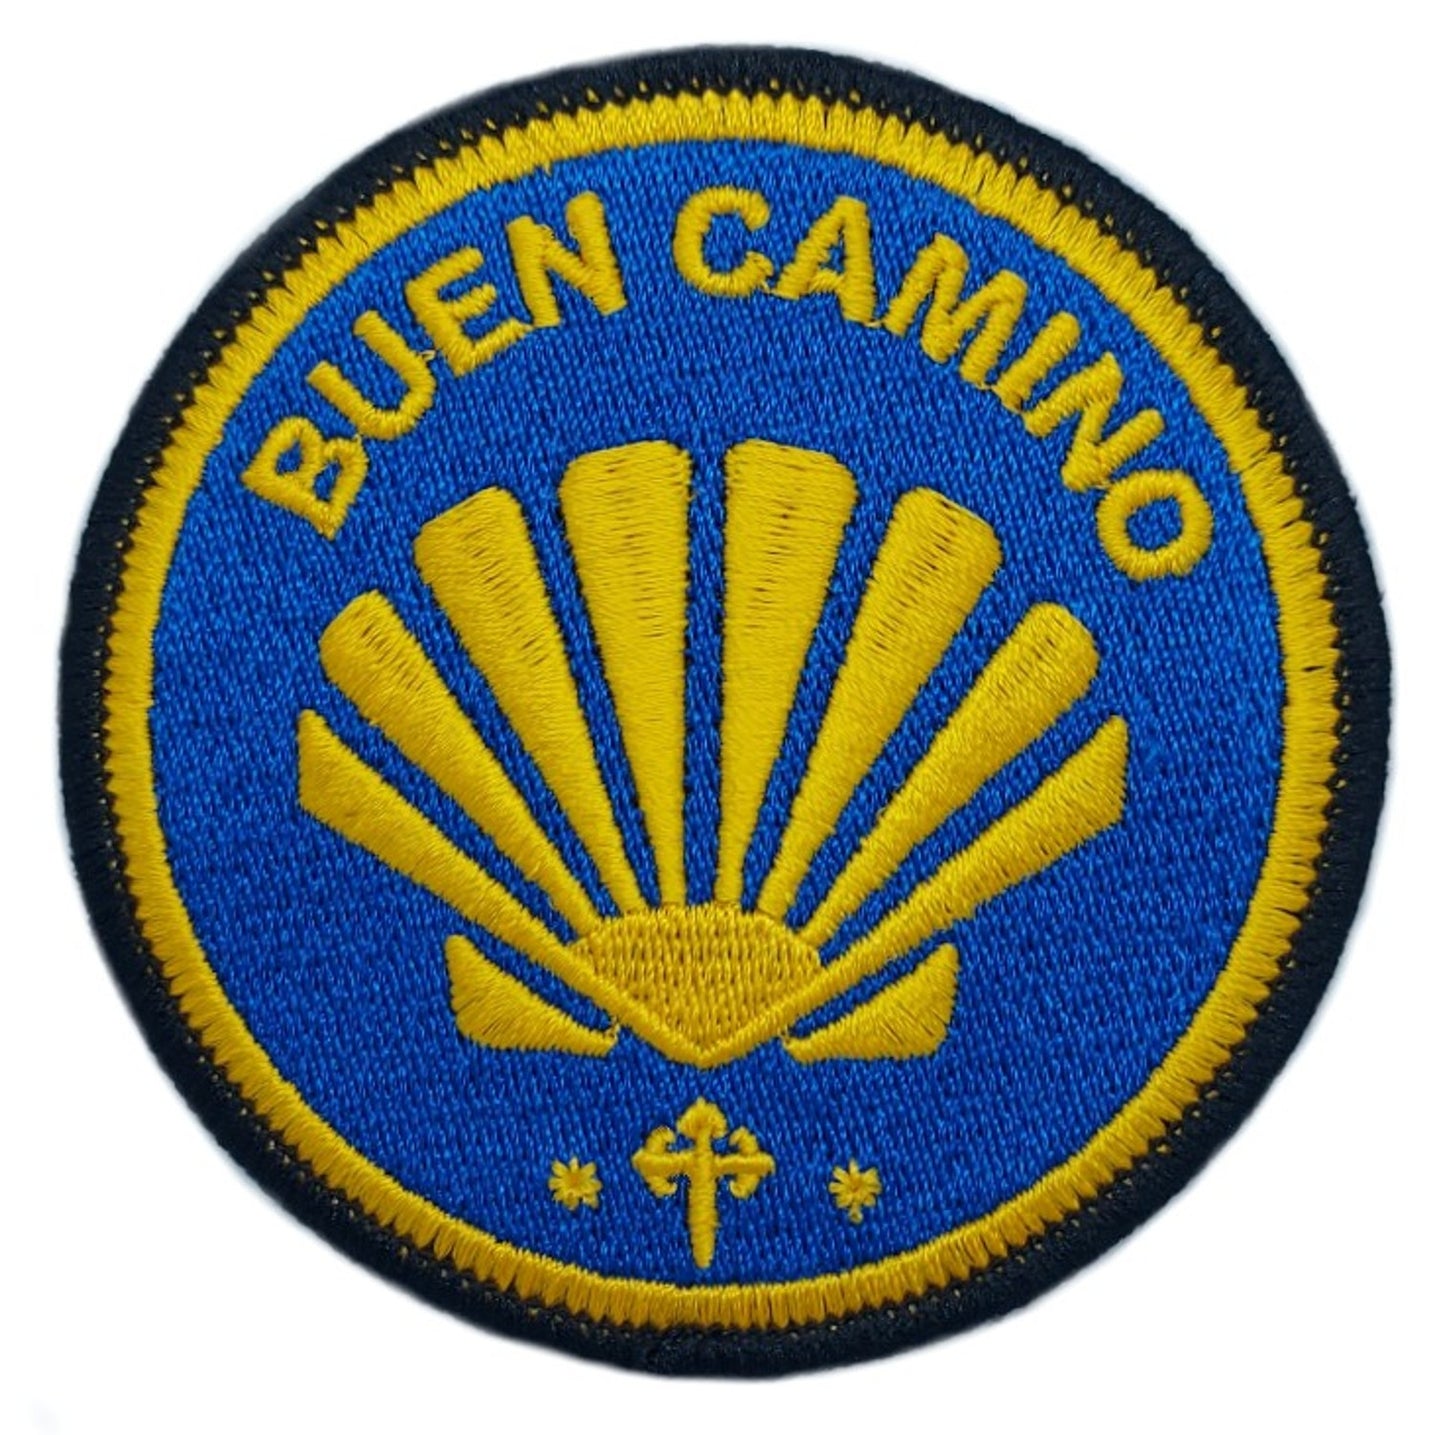 Buen Camino Patch (3 Inch) Fully Embroidered Iron/Sew-on Badge Saint James Way Camino De Santiago Patches